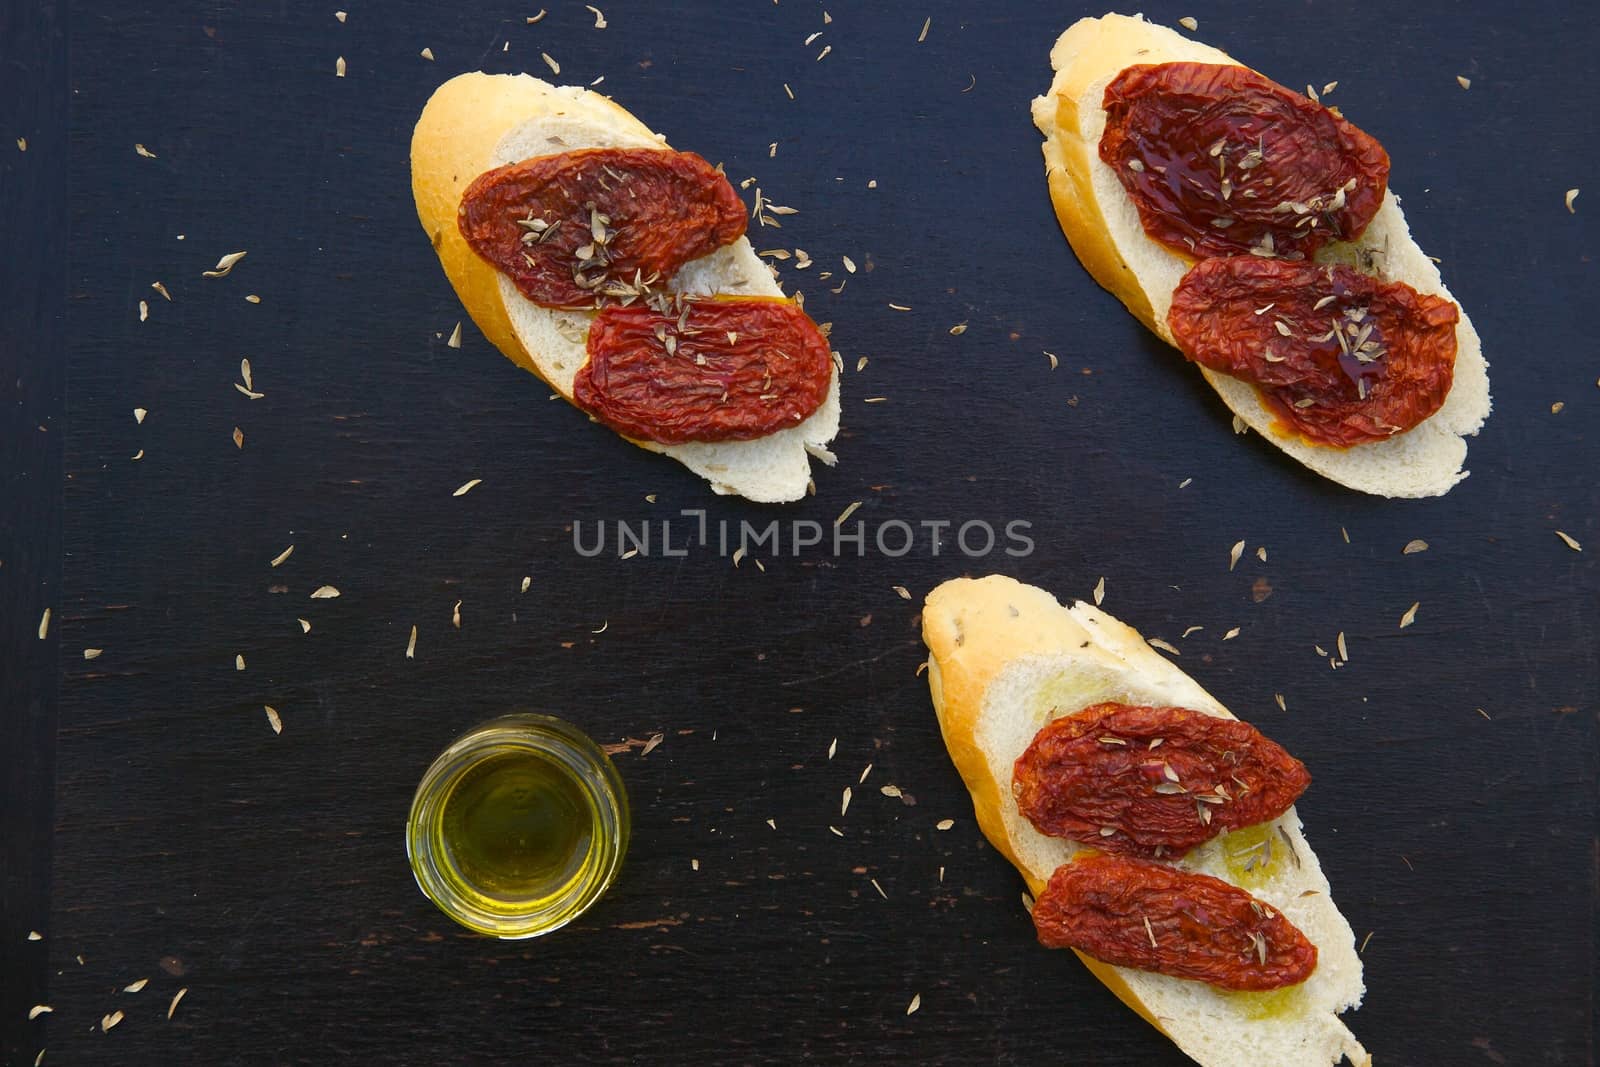 Flavorful starter - sun-dried red tomatoes on the pieces of French baguette by tolikoff_photography